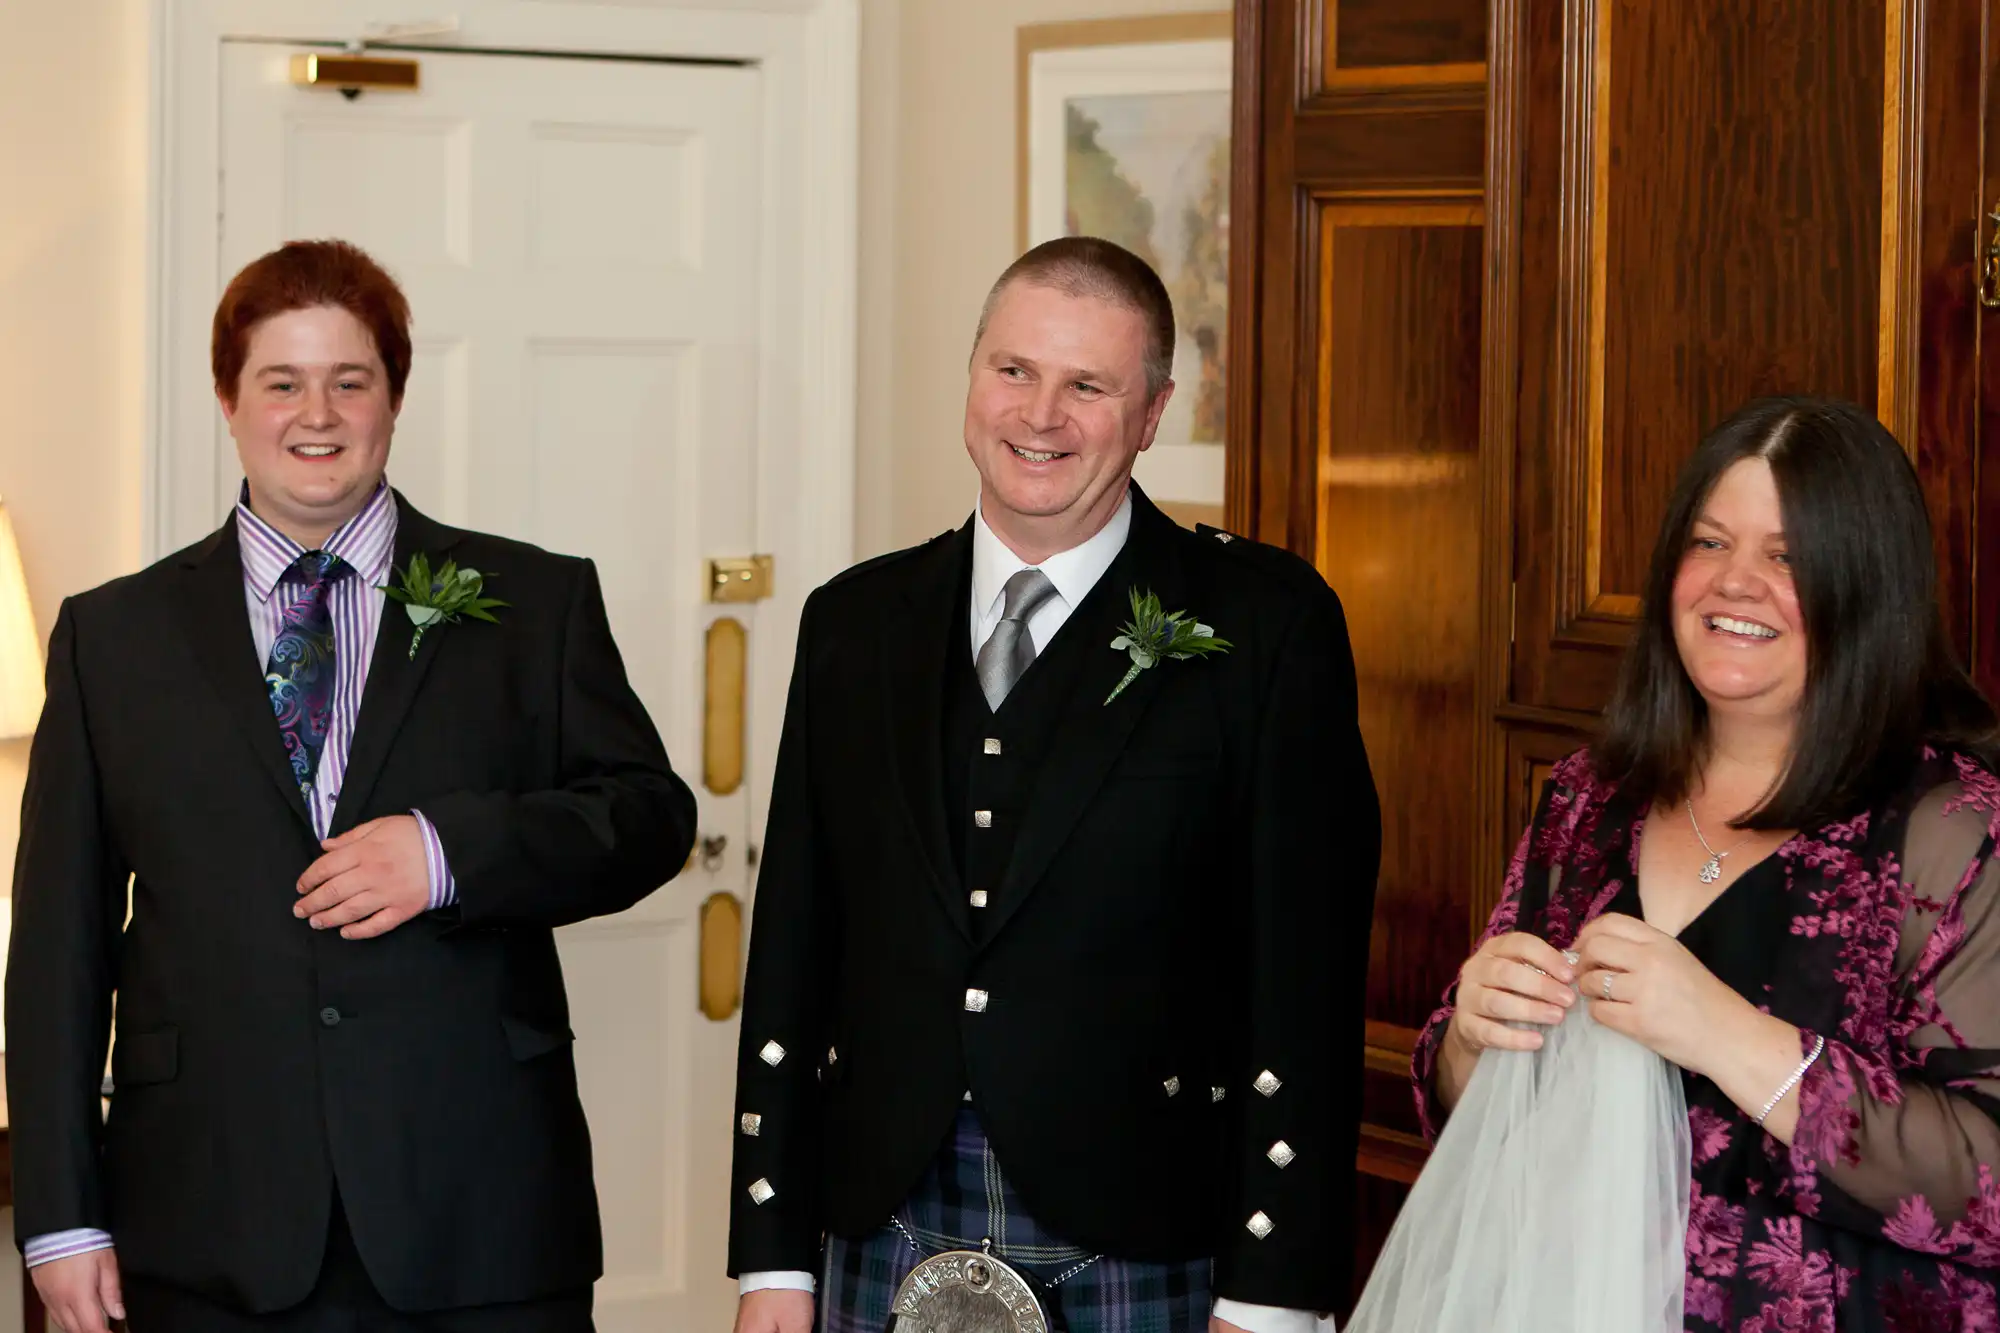 Three people smiling in a room, one in traditional scottish attire with a kilt, standing near an open door.